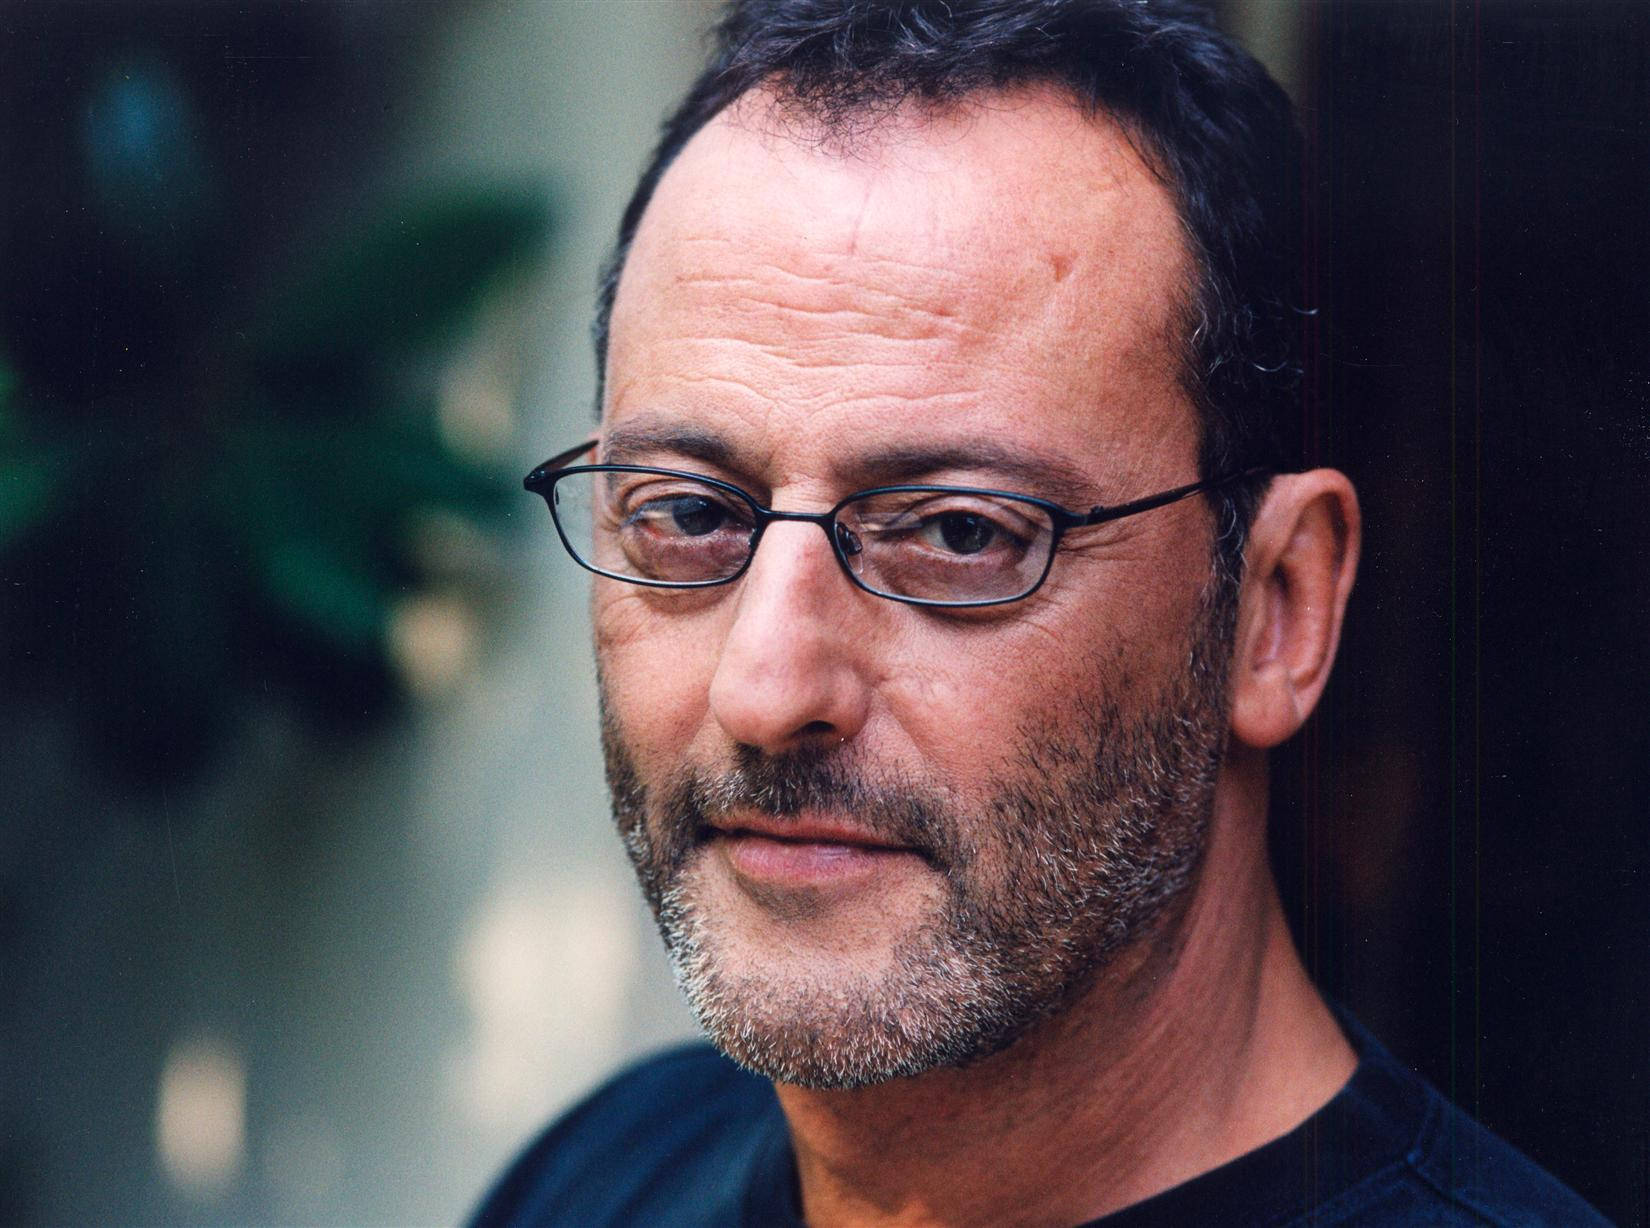 Iconic French actor Jean Reno poses pensively. Wallpaper